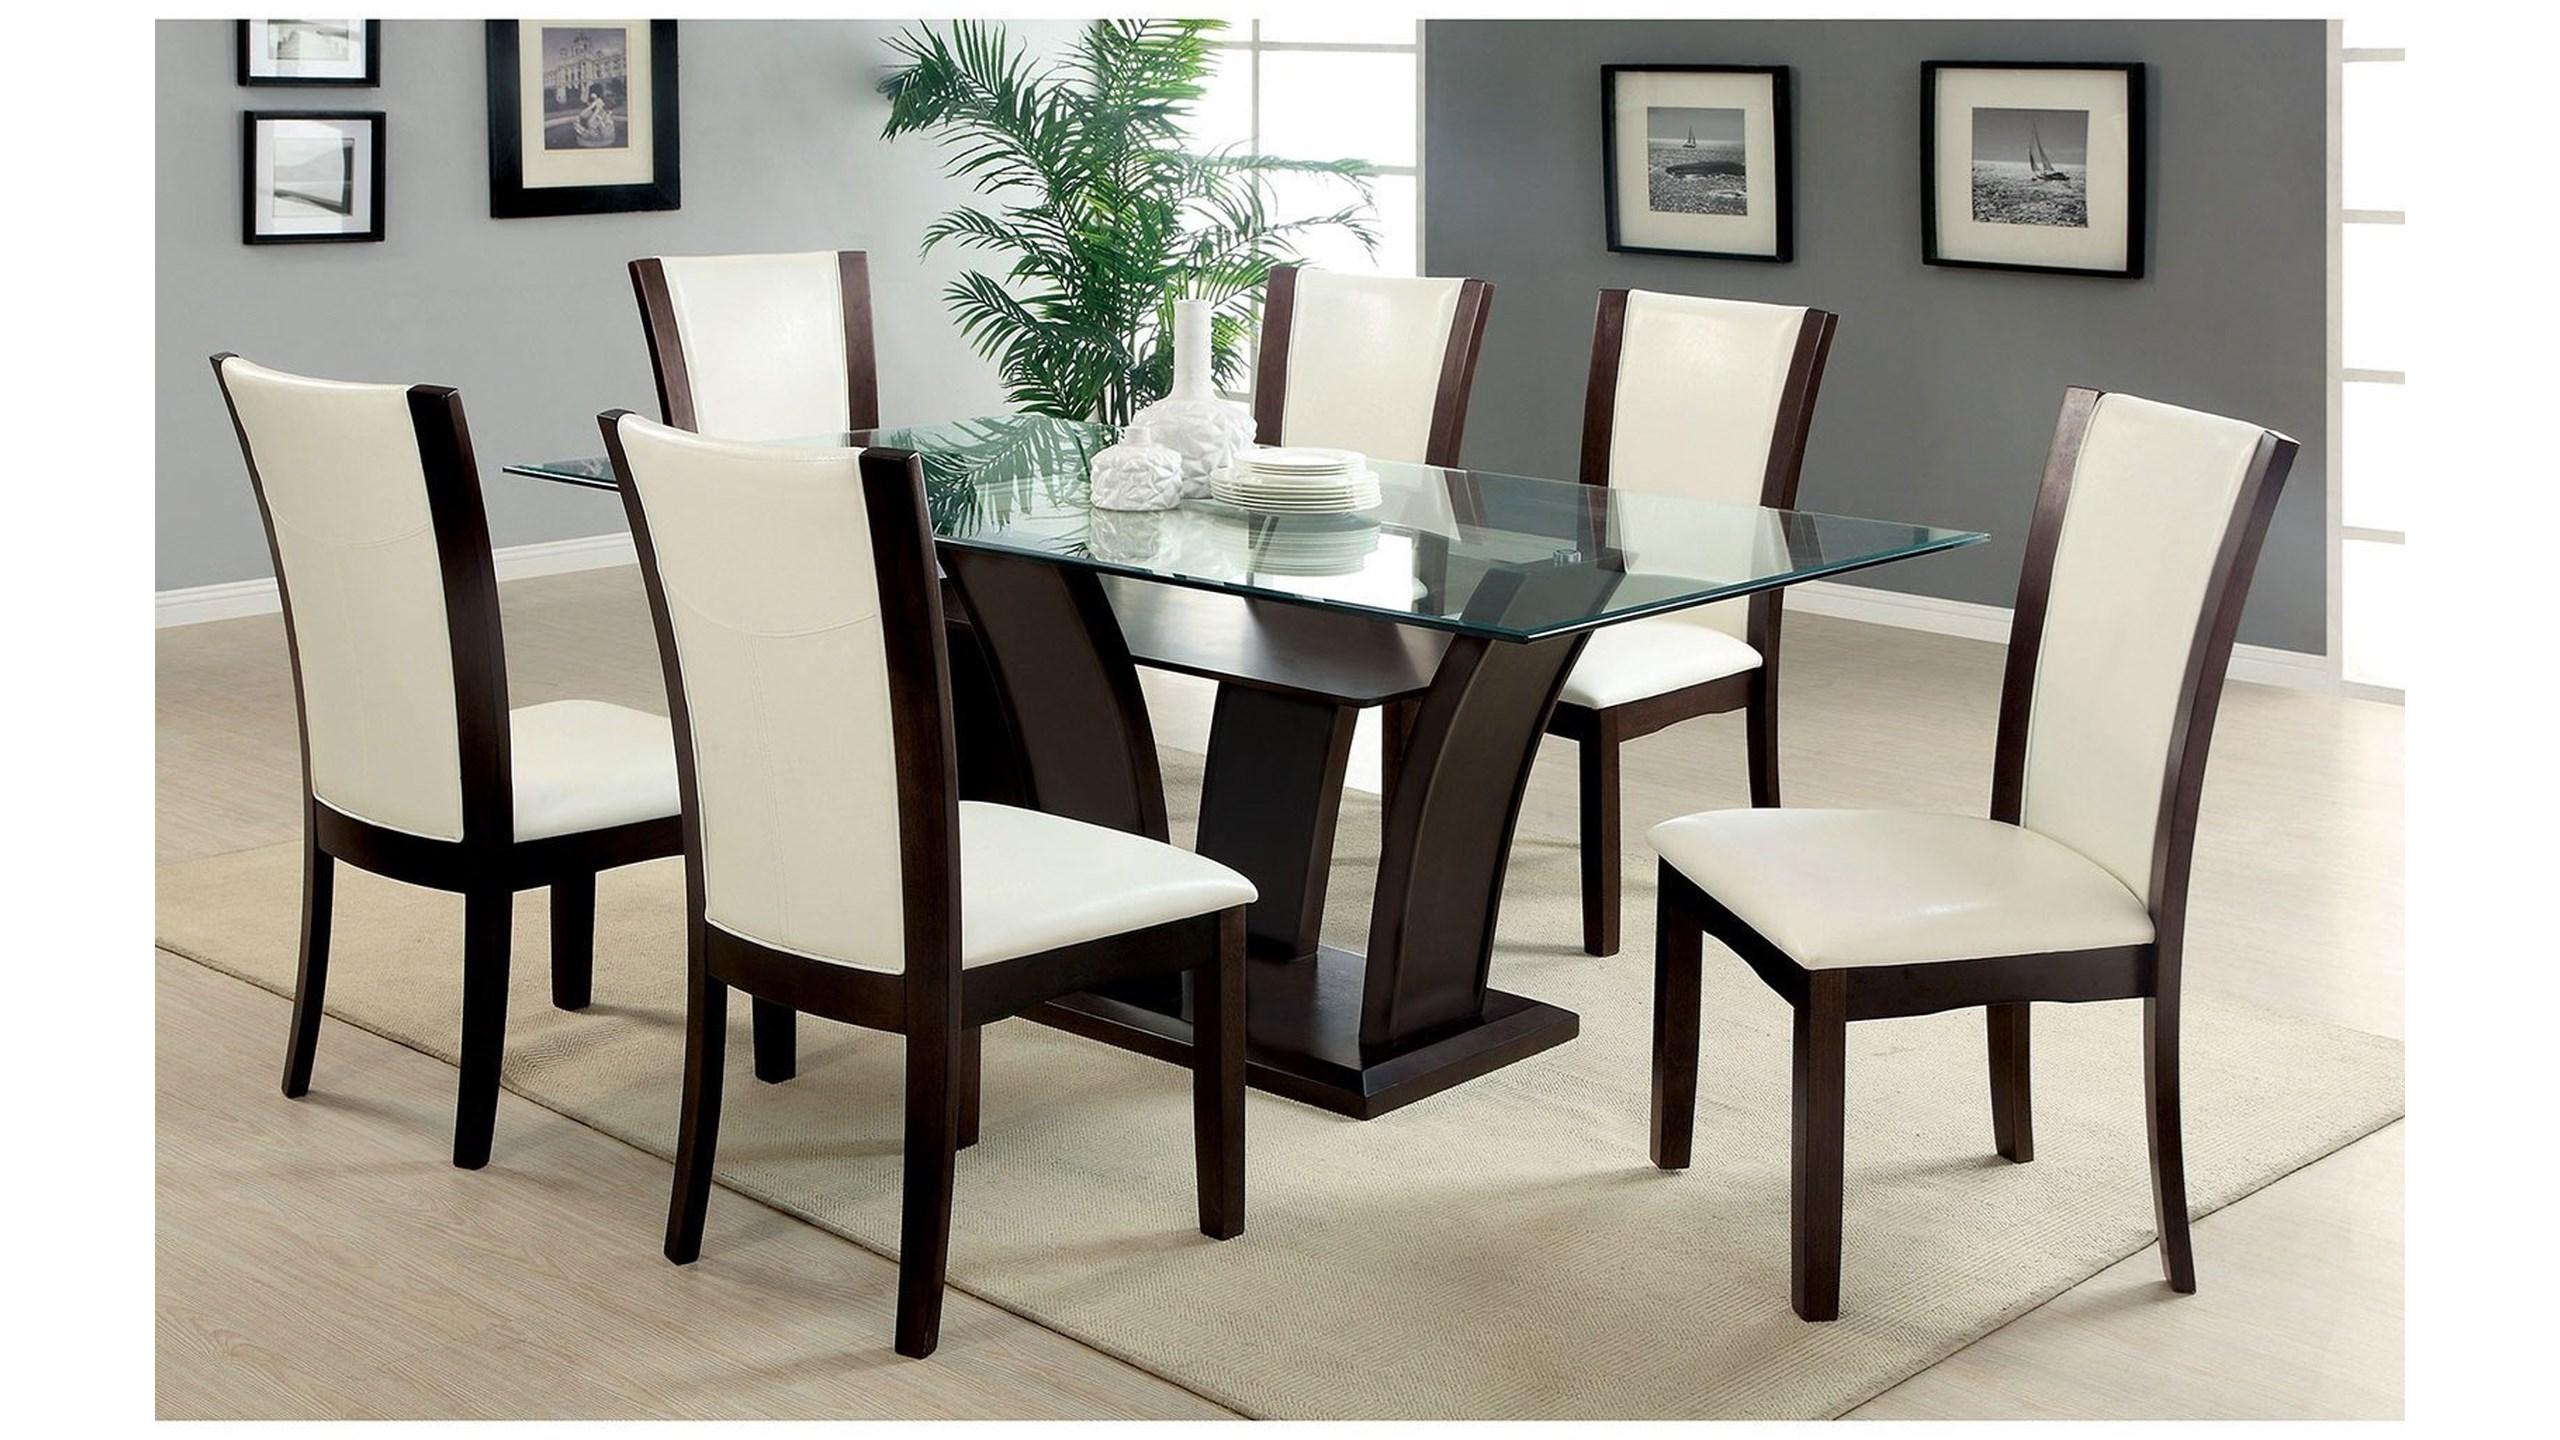 

    
Espresso Dining Table + 6 White PU Chair by Crown Mark Camelia 1210T-4272-7pcs
